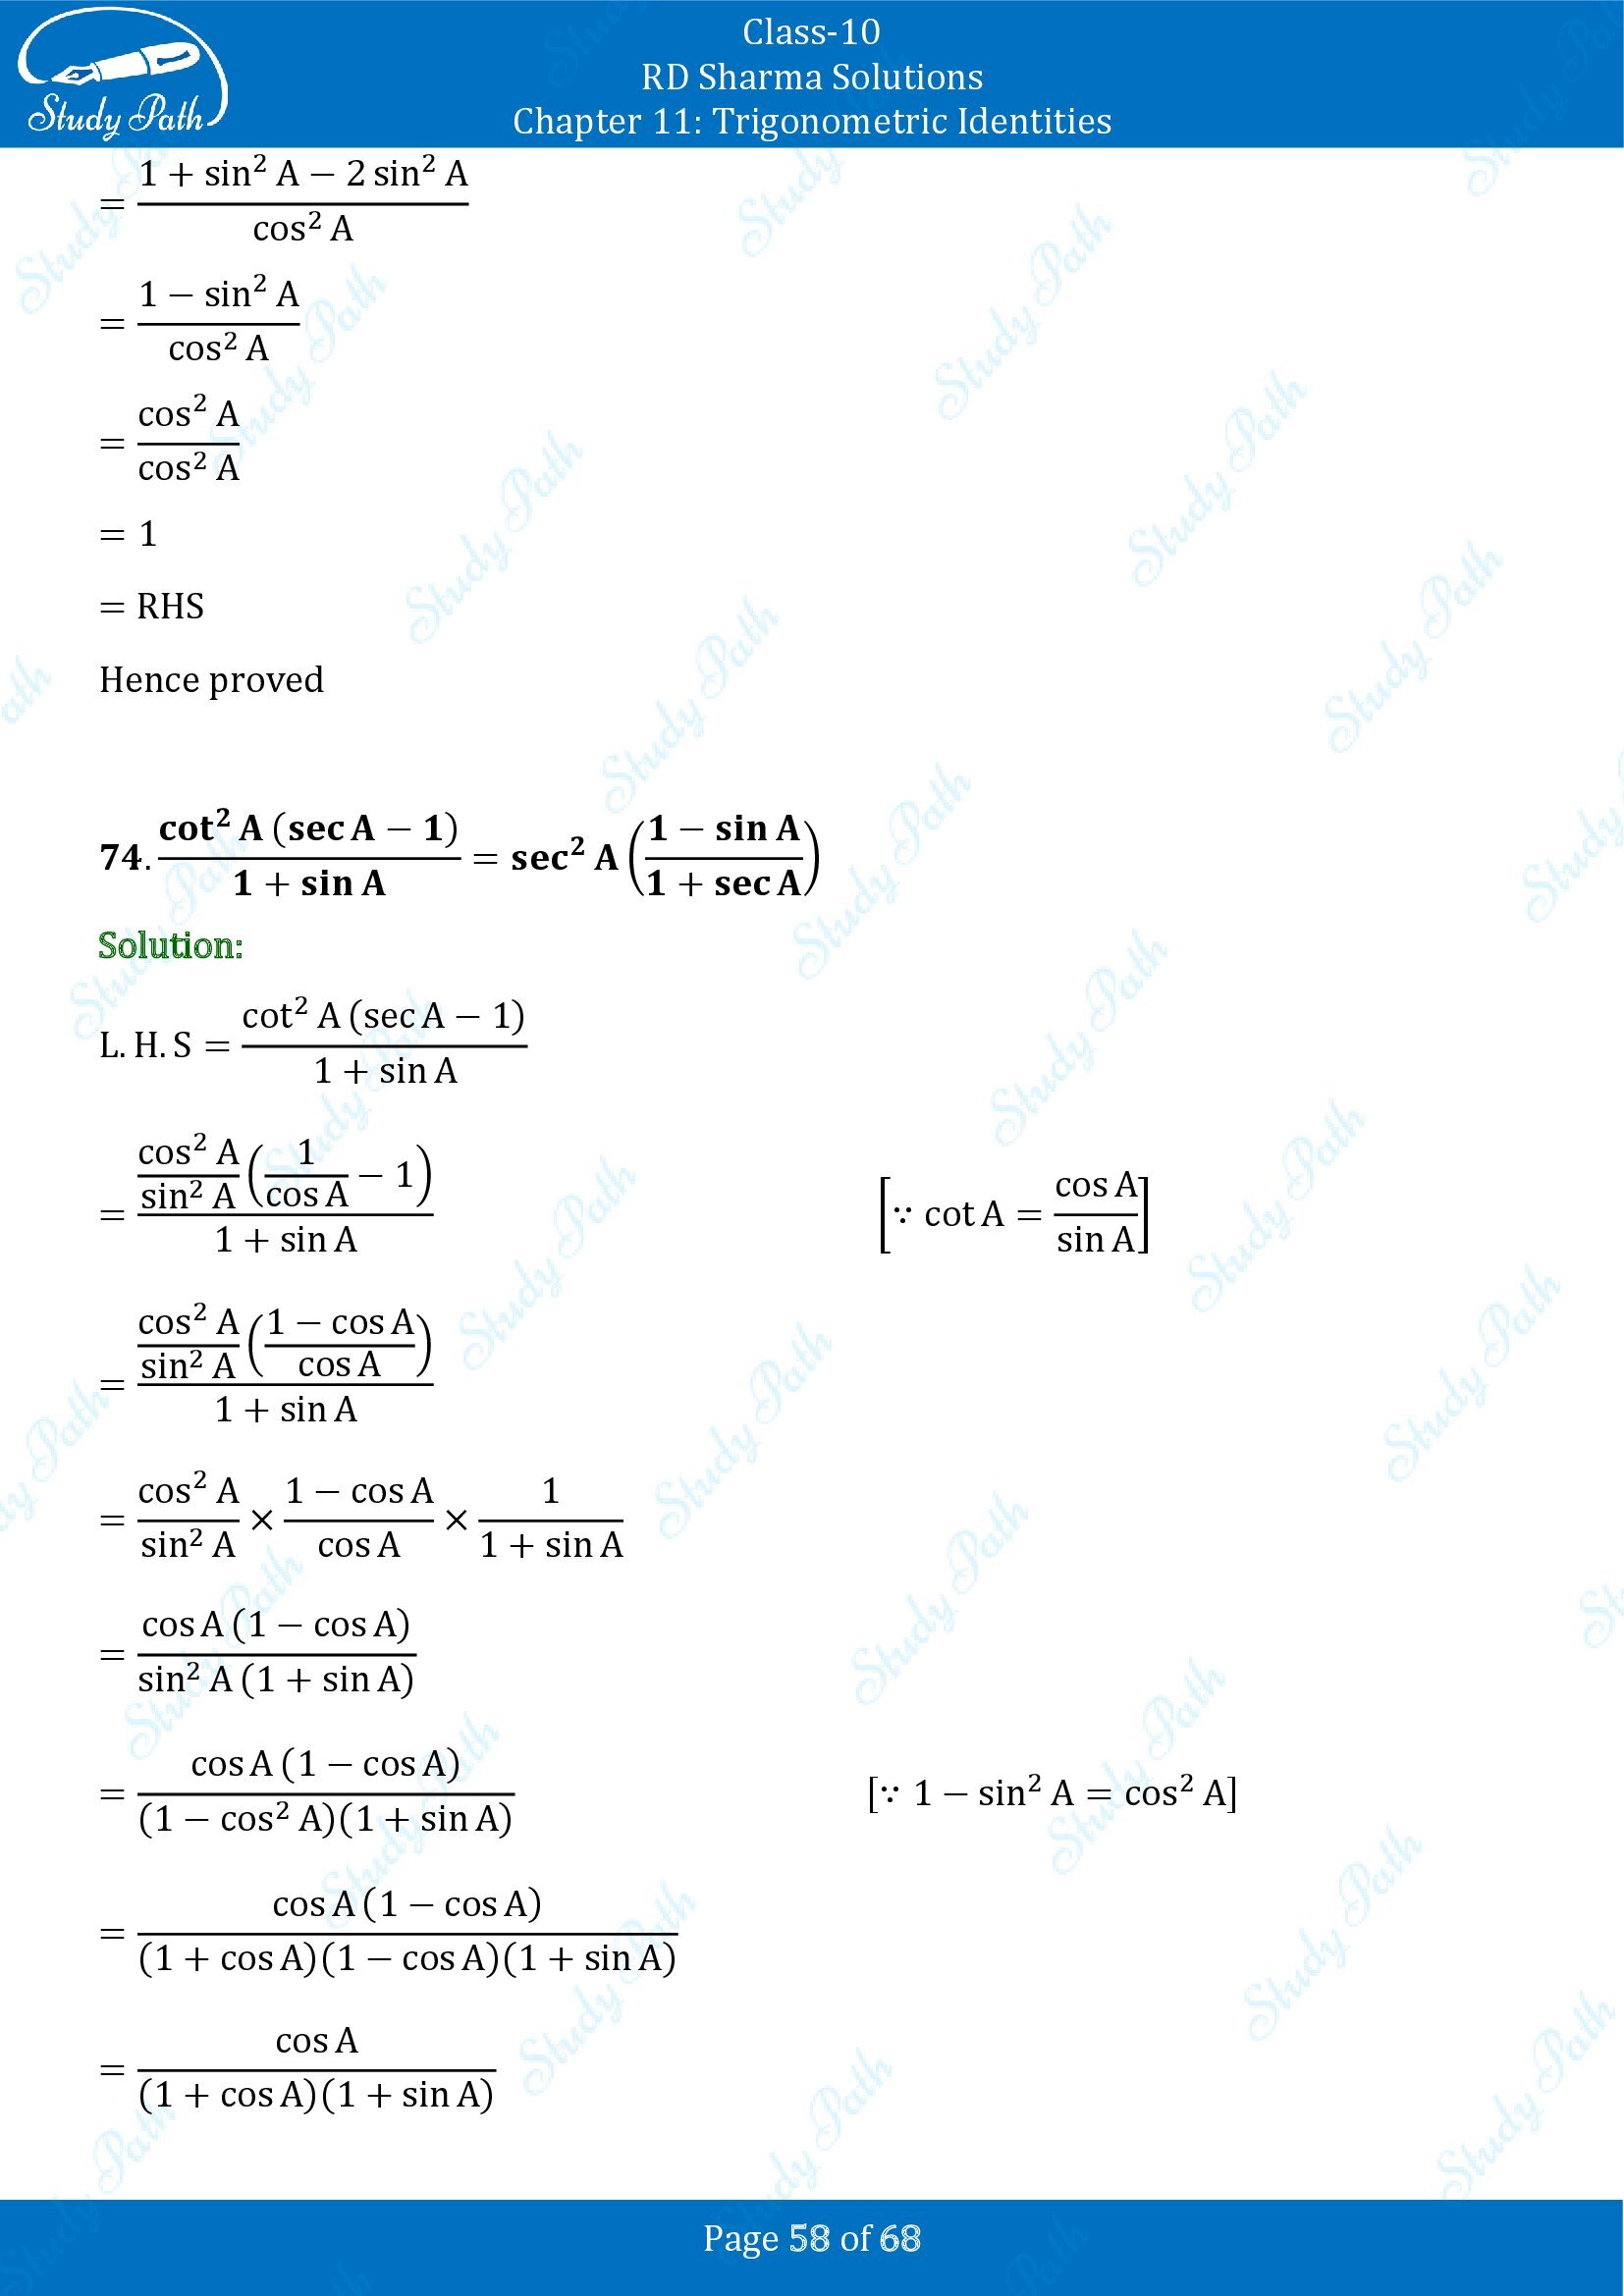 RD Sharma Solutions Class 10 Chapter 11 Trigonometric Identities Exercise 11.1 00058